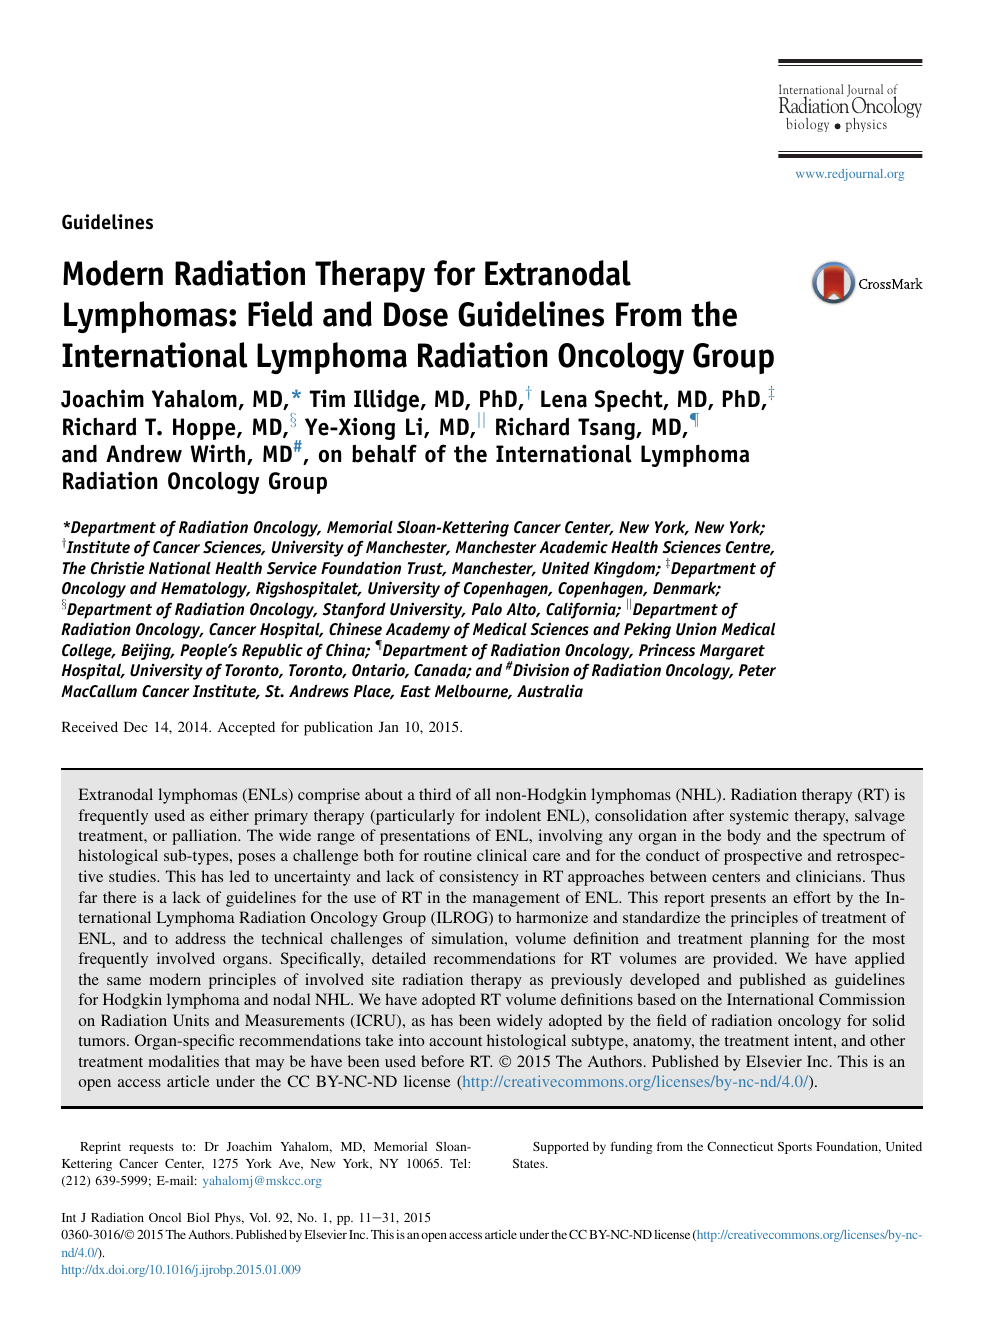 Radiation for Extranodal Lymphomas: Field and Dose Guidelines From the International Lymphoma Radiation Oncology Group – topic of research paper in medicine. Download scholarly article PDF and read for